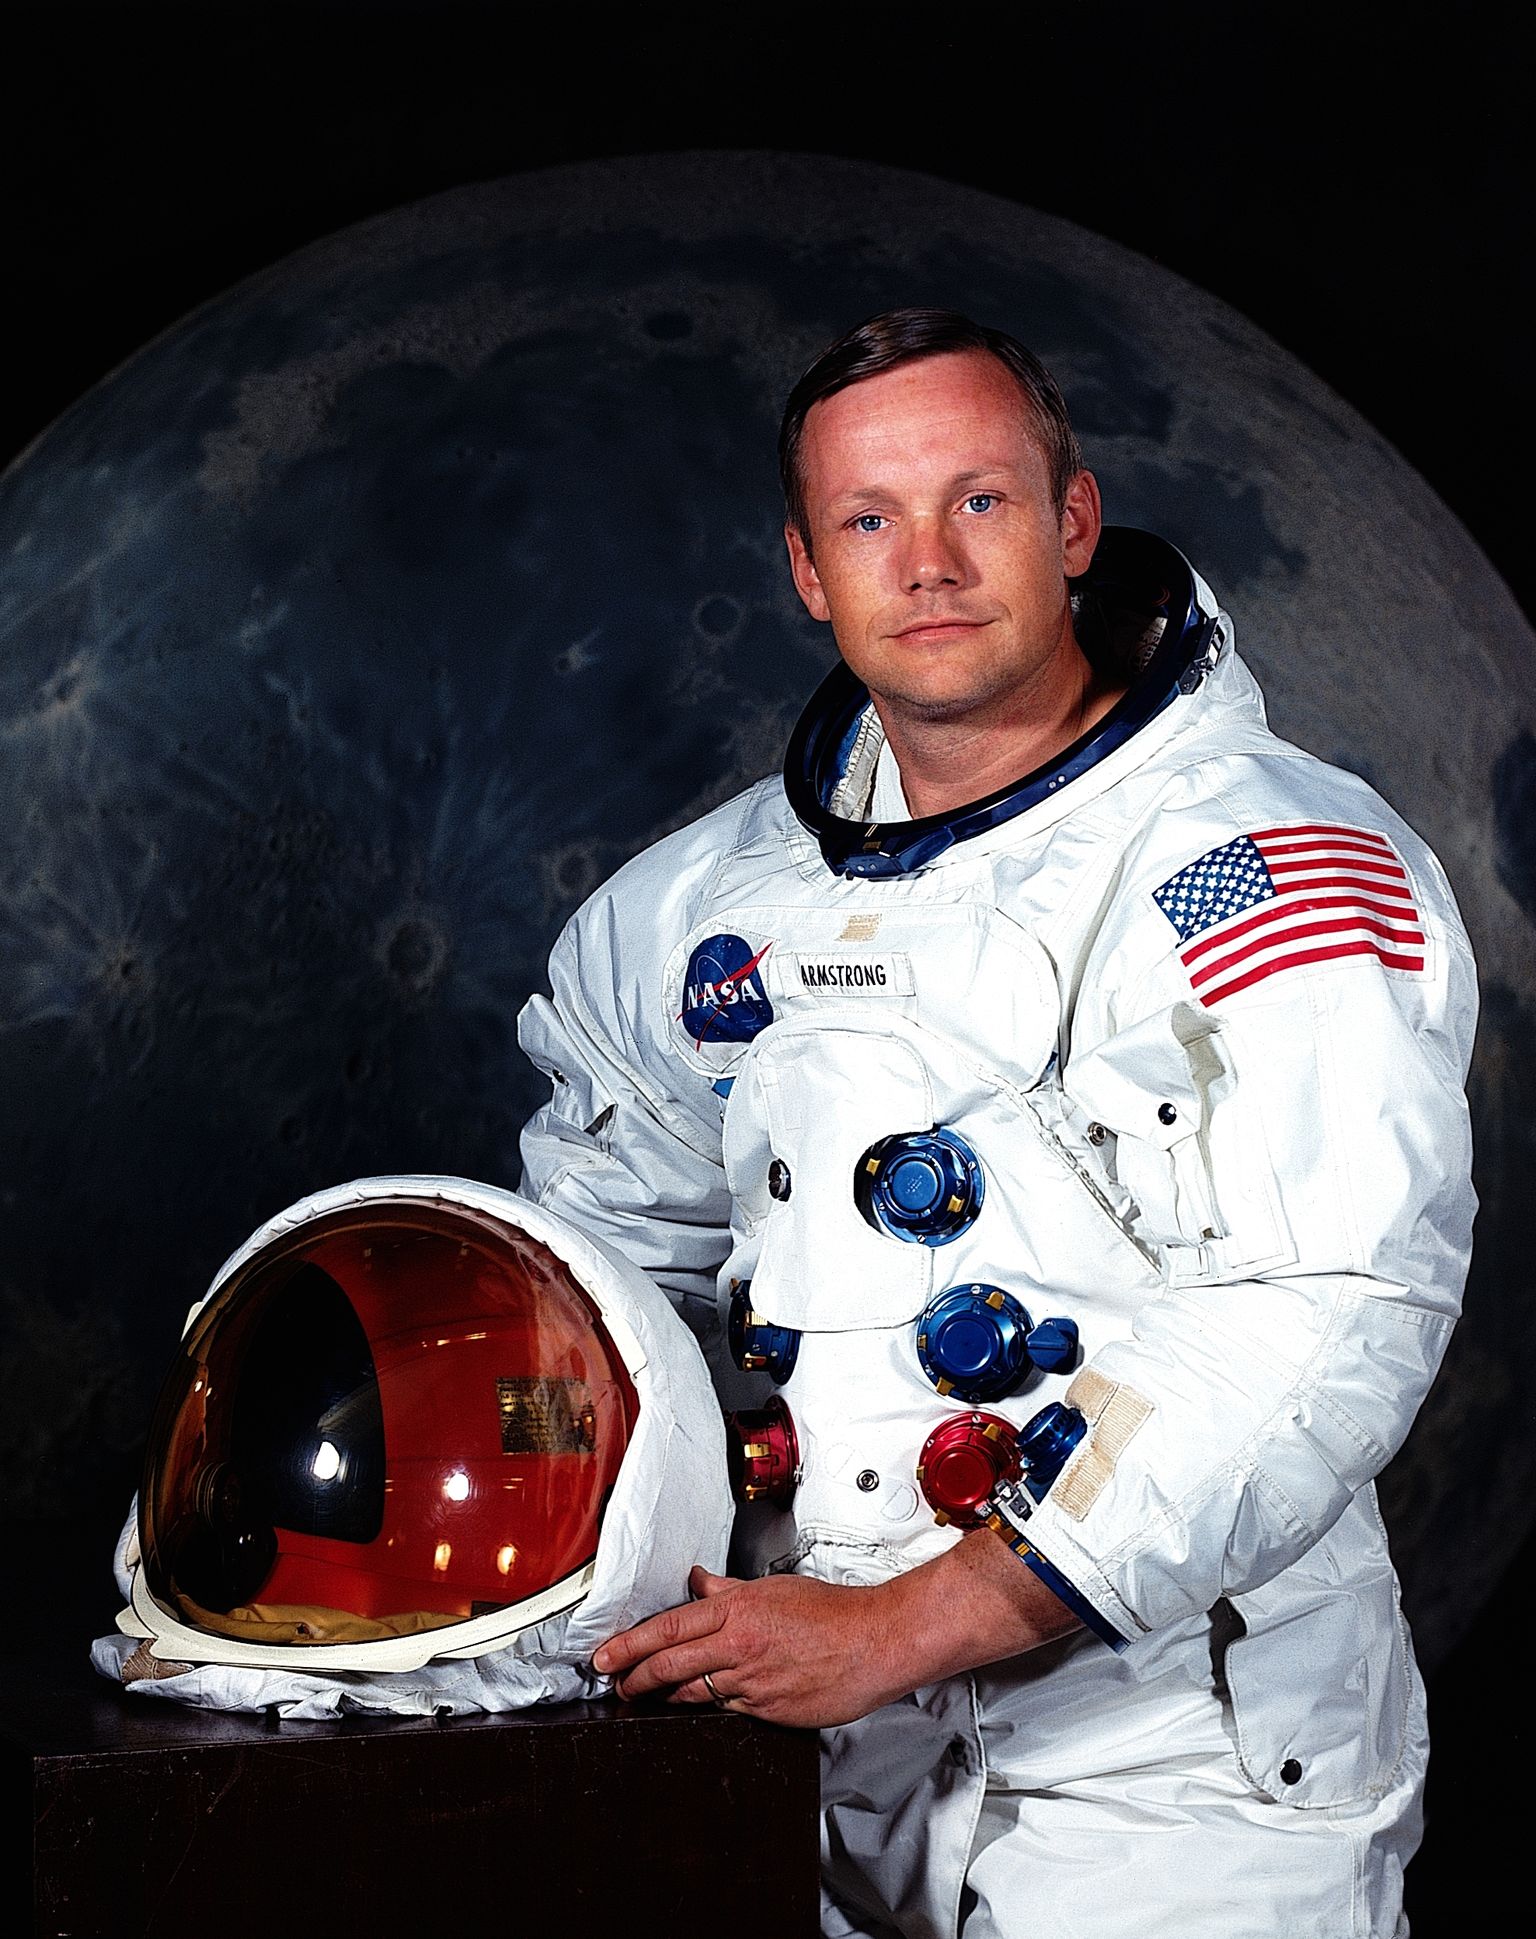 Astronaut Neil A. Armstrong, Commander of the Apollo 11 Lunar Landing Mission in 1969 | Source: Getty Images